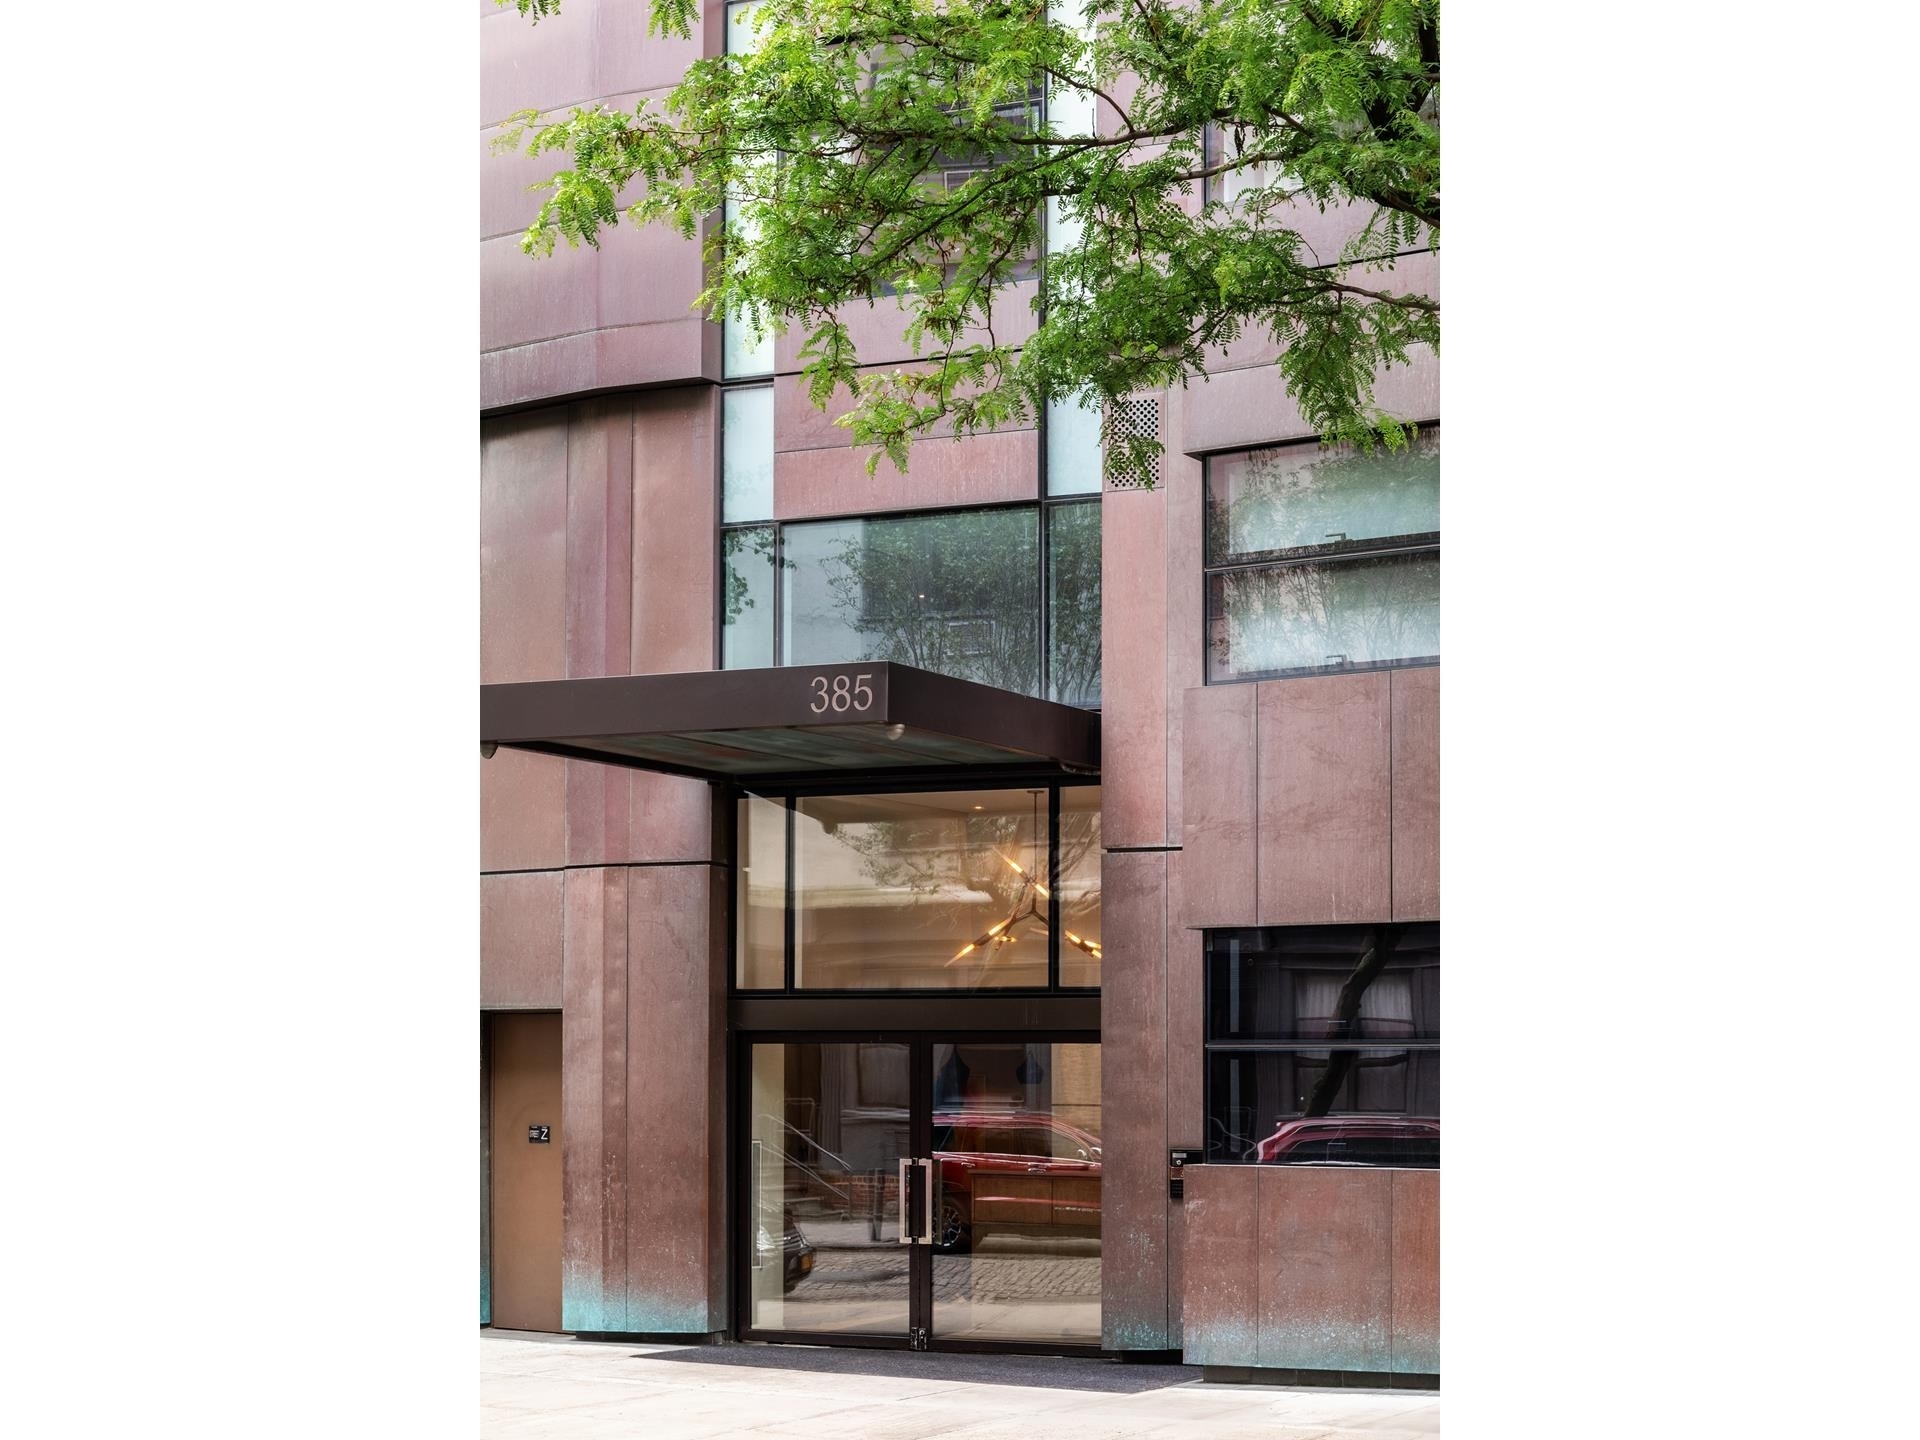 21. Condominiums for Sale at 385 West 12Th, 385 W 12TH ST, PHW West Village, New York, NY 10014